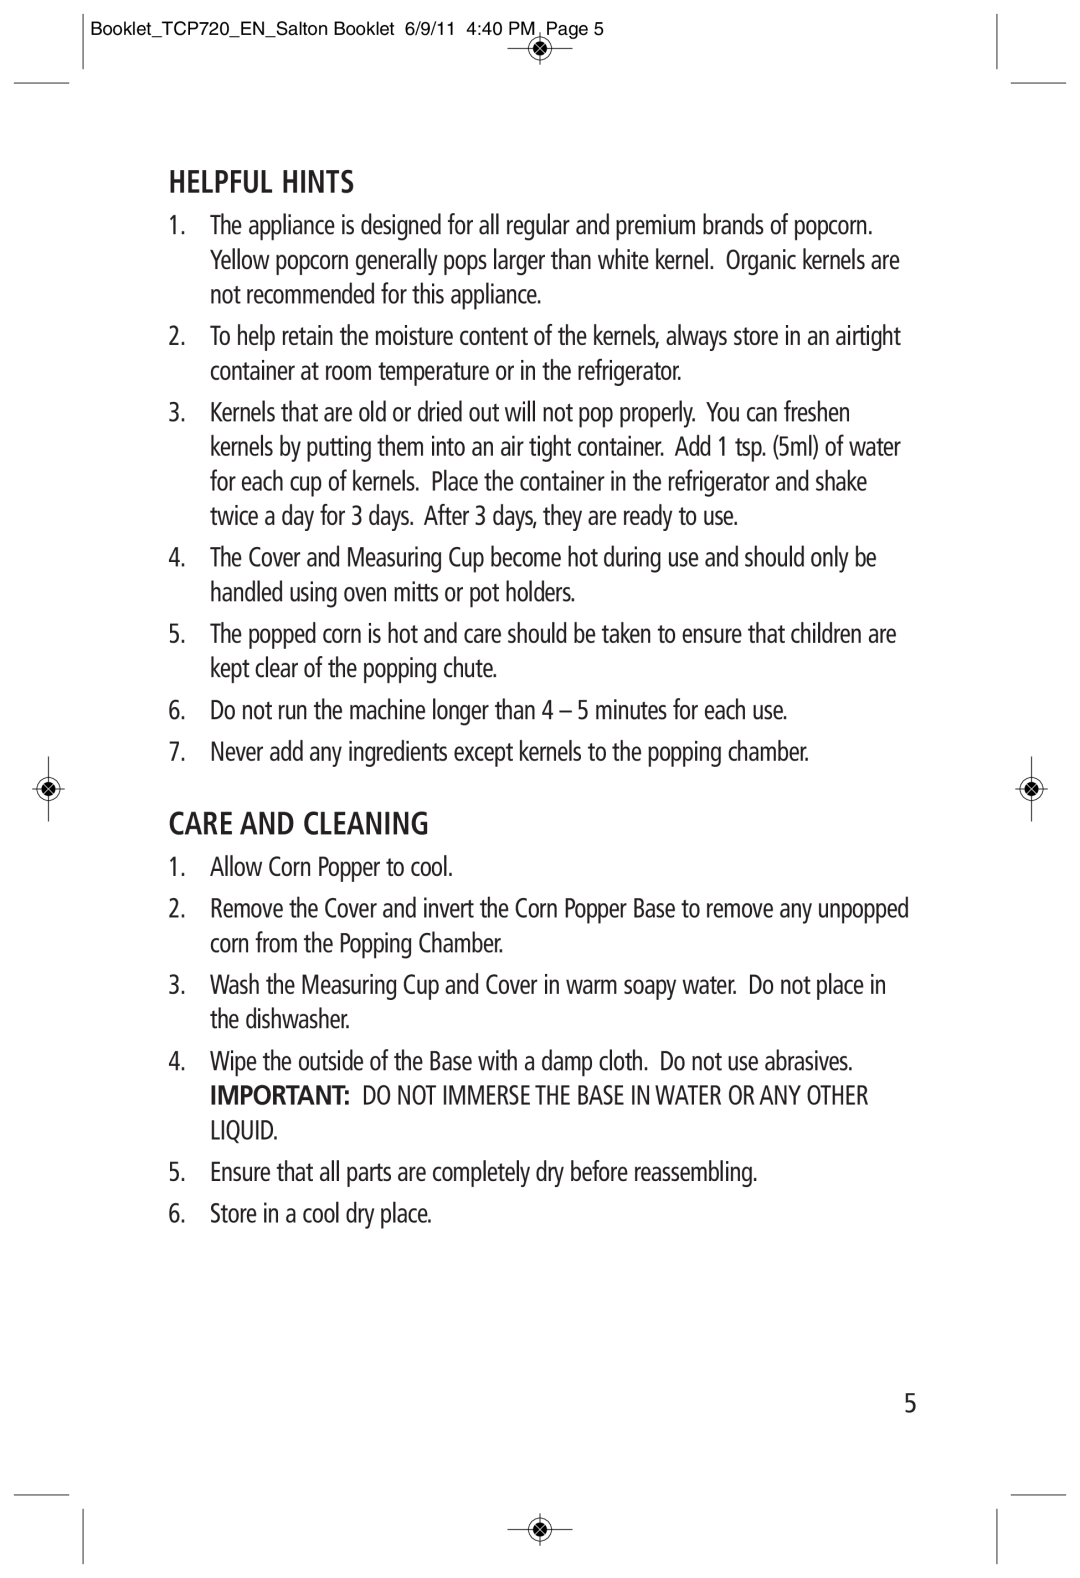 Toastess TCP720 manual Helpful Hints, Care And Cleaning 